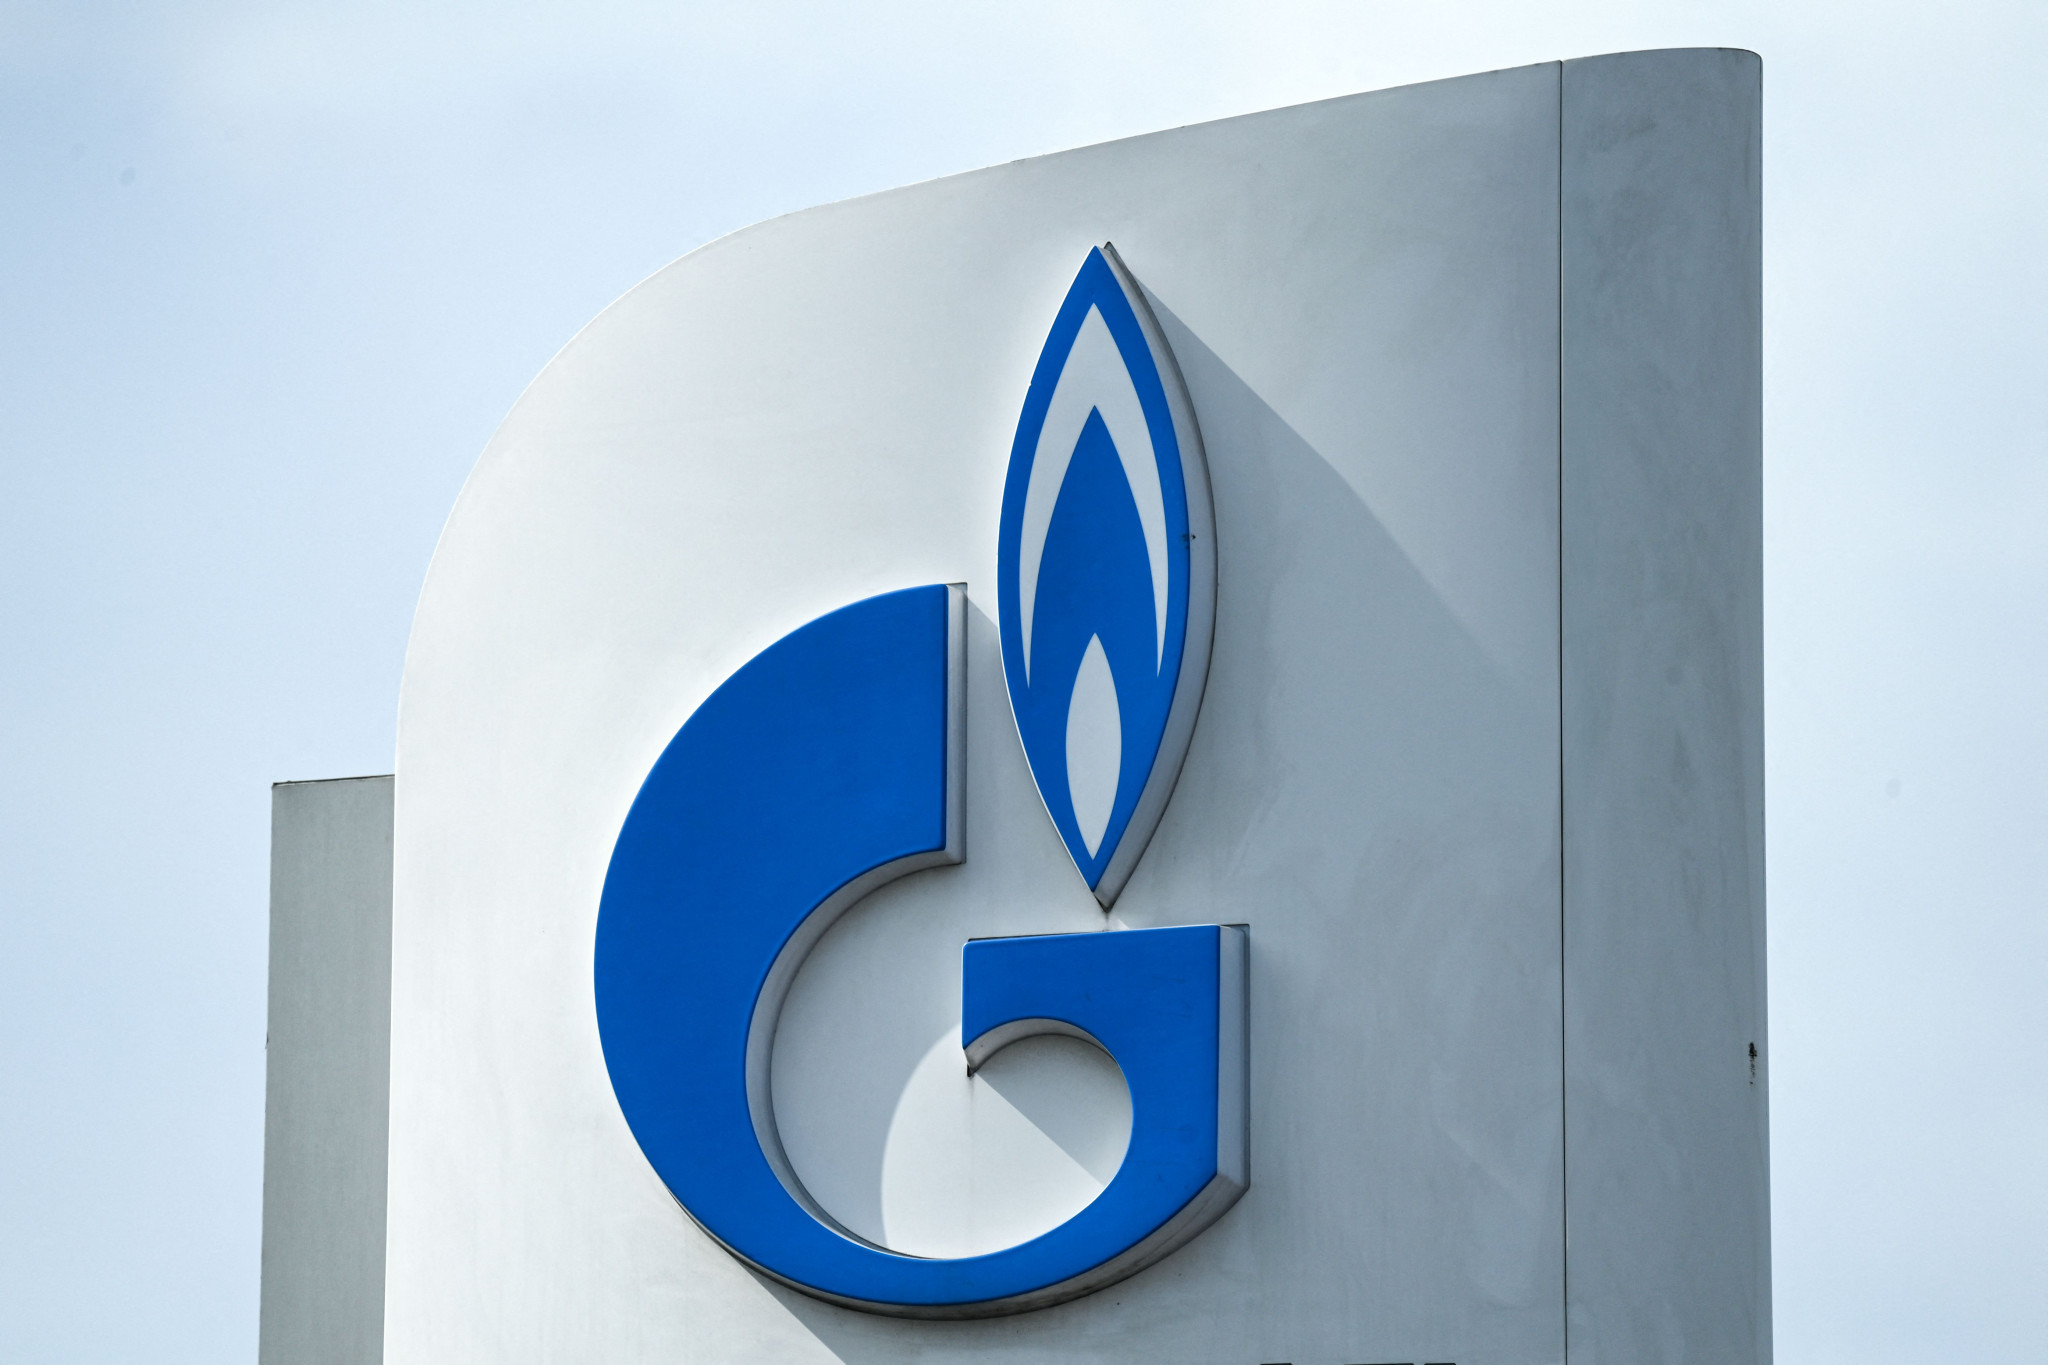 Gazprom remains the general partner of IBA, despite Russia's invasion of Ukraine ©Getty Images